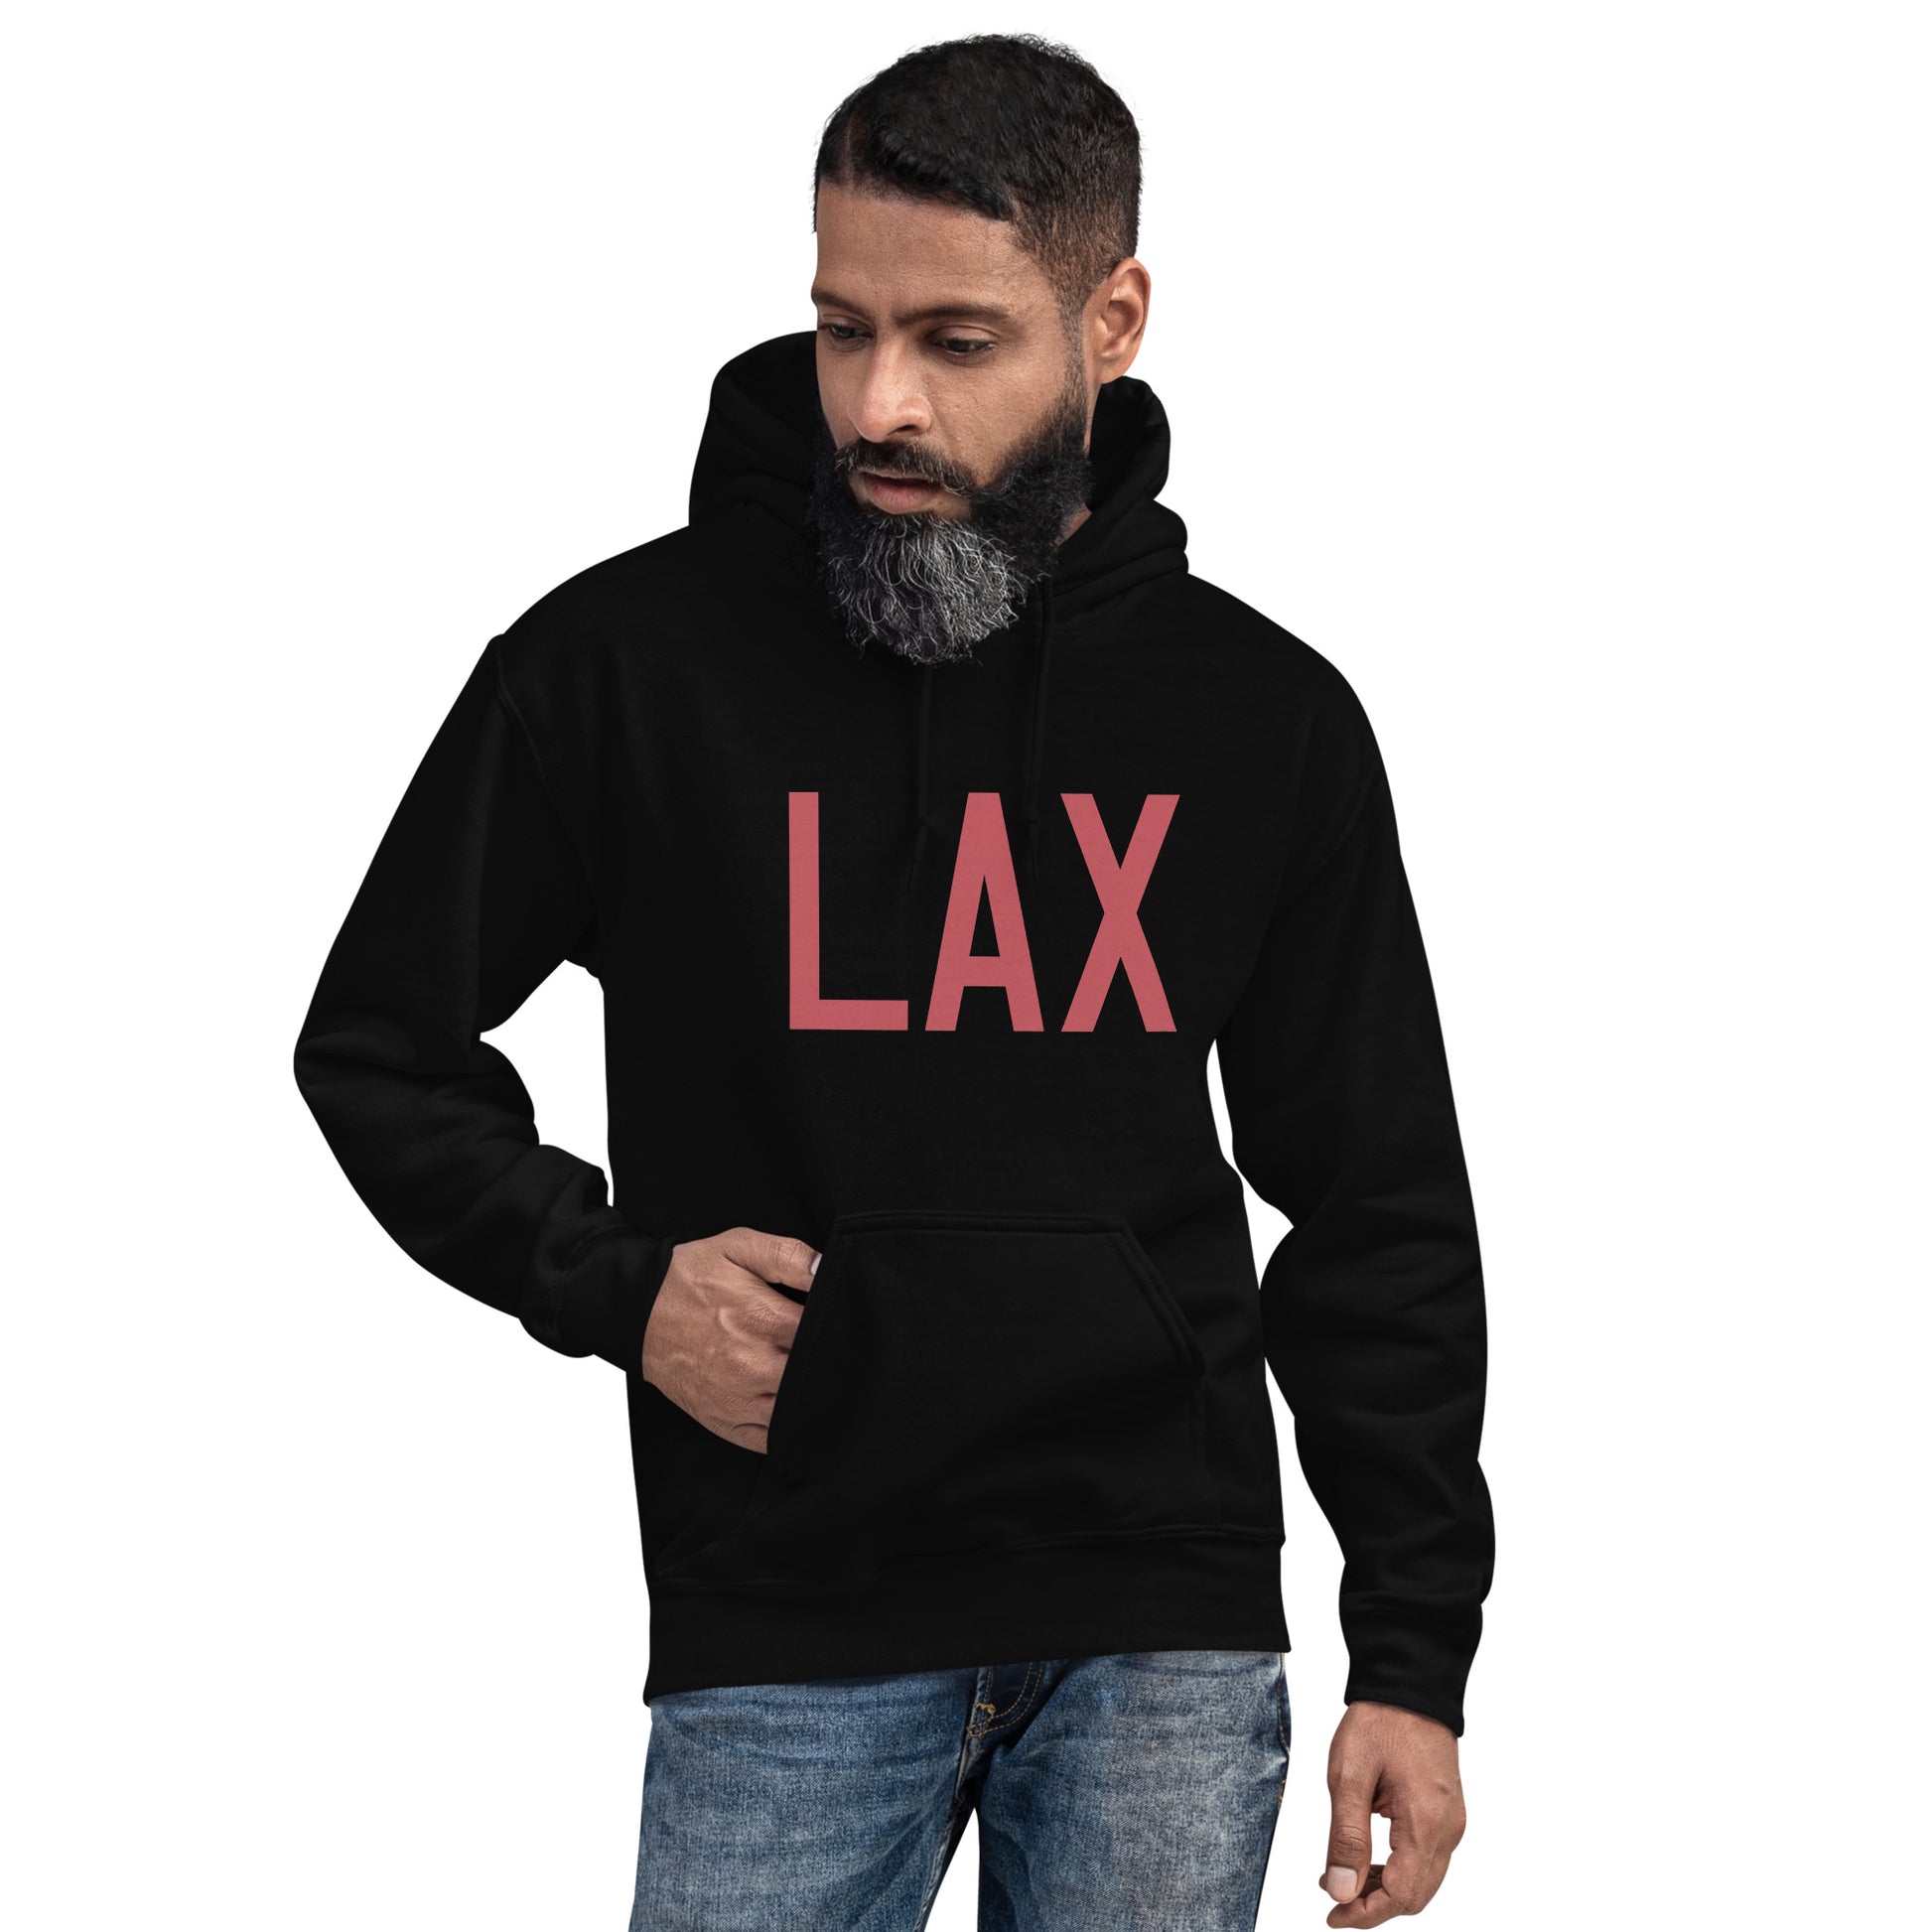 Aviation Enthusiast Hoodie - Deep Pink Graphic • LAX Los Angeles • YHM Designs - Image 05